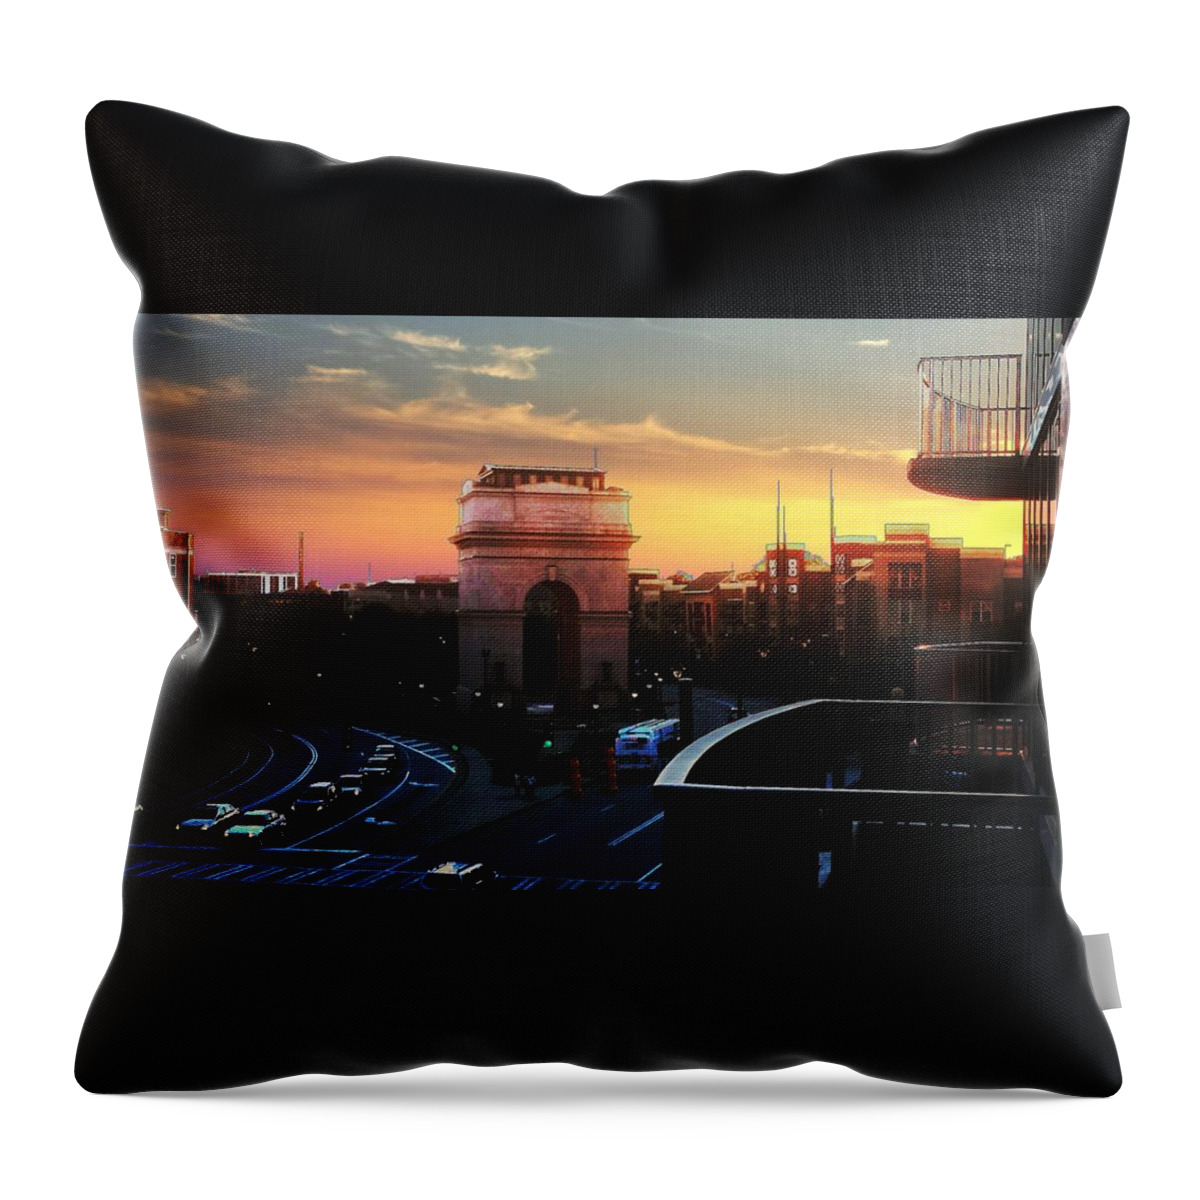 Sunset Throw Pillow featuring the photograph Atlantic Station Sunset Vista by Kenny Glover